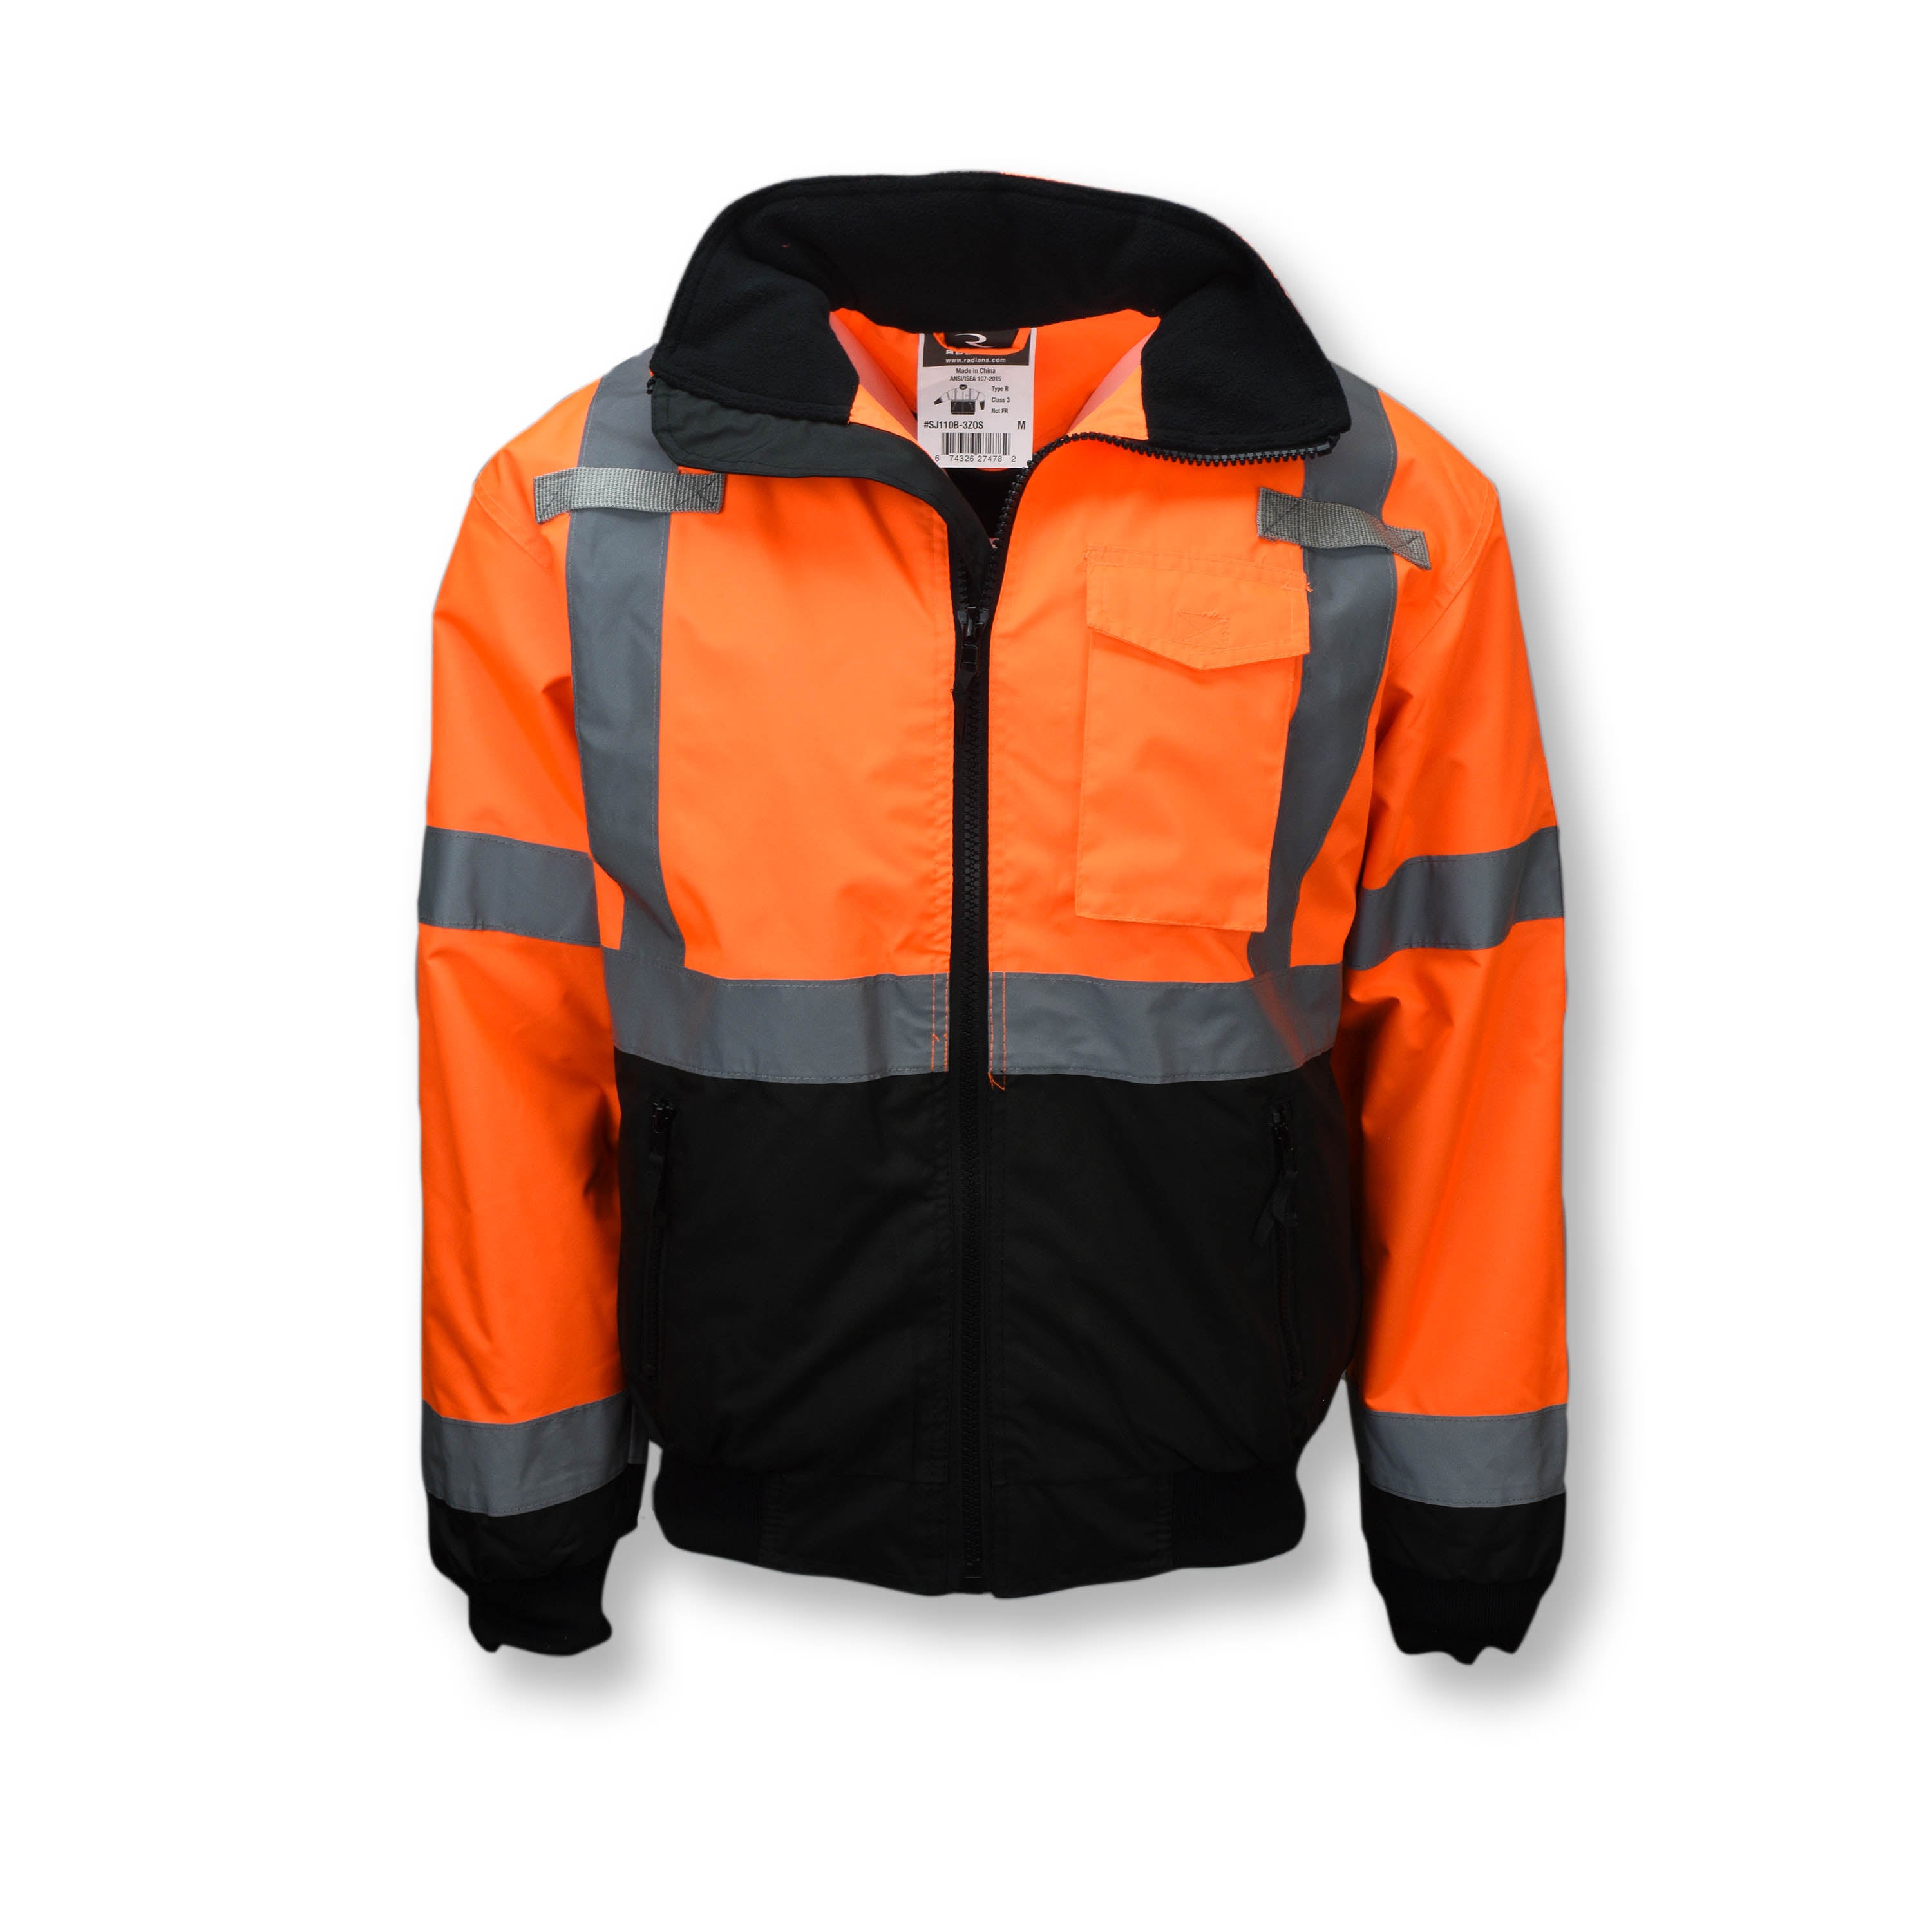 2-in-1 Jacket With Removable Fleece Liner